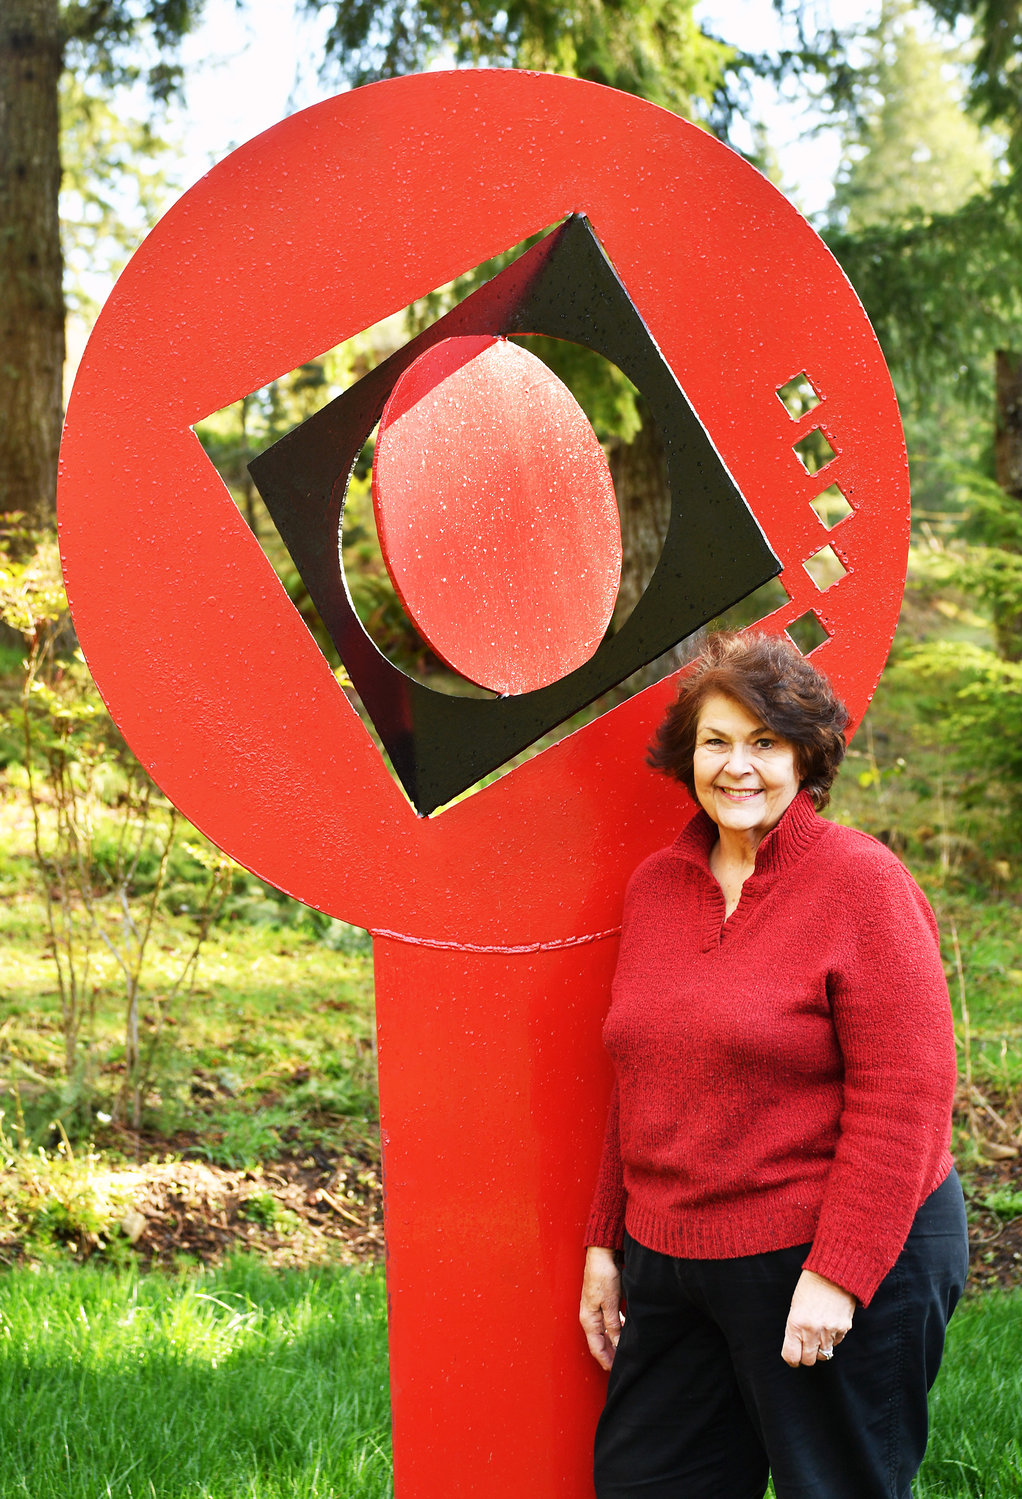 Rainier-area sculptor Myrna Orsini with her creation "The Sphere," a featured piece in her outside Monarch Sculpture Park.